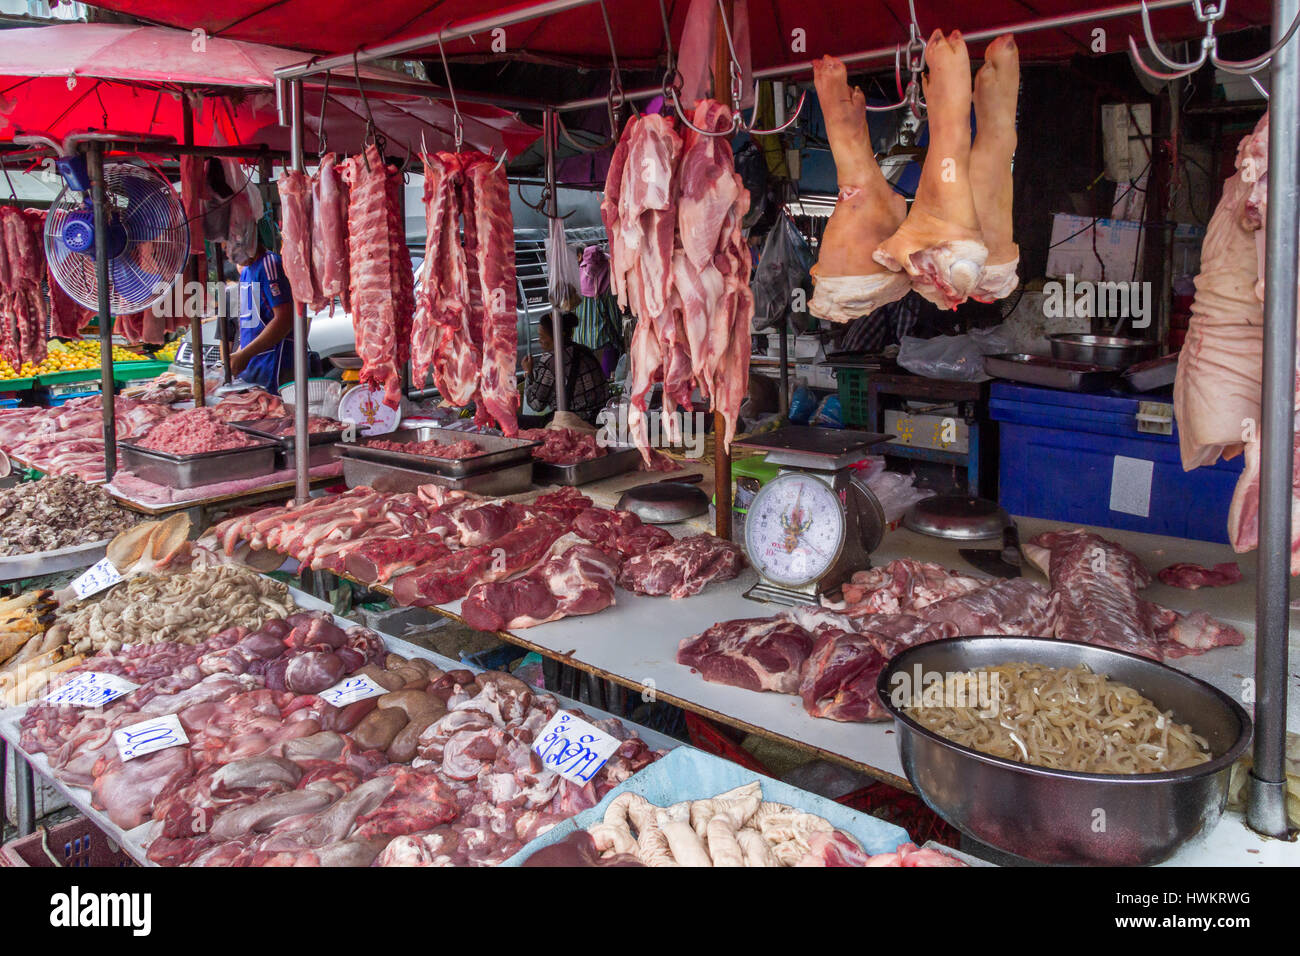 raw-meat-for-sale-on-market-stall-on-khl